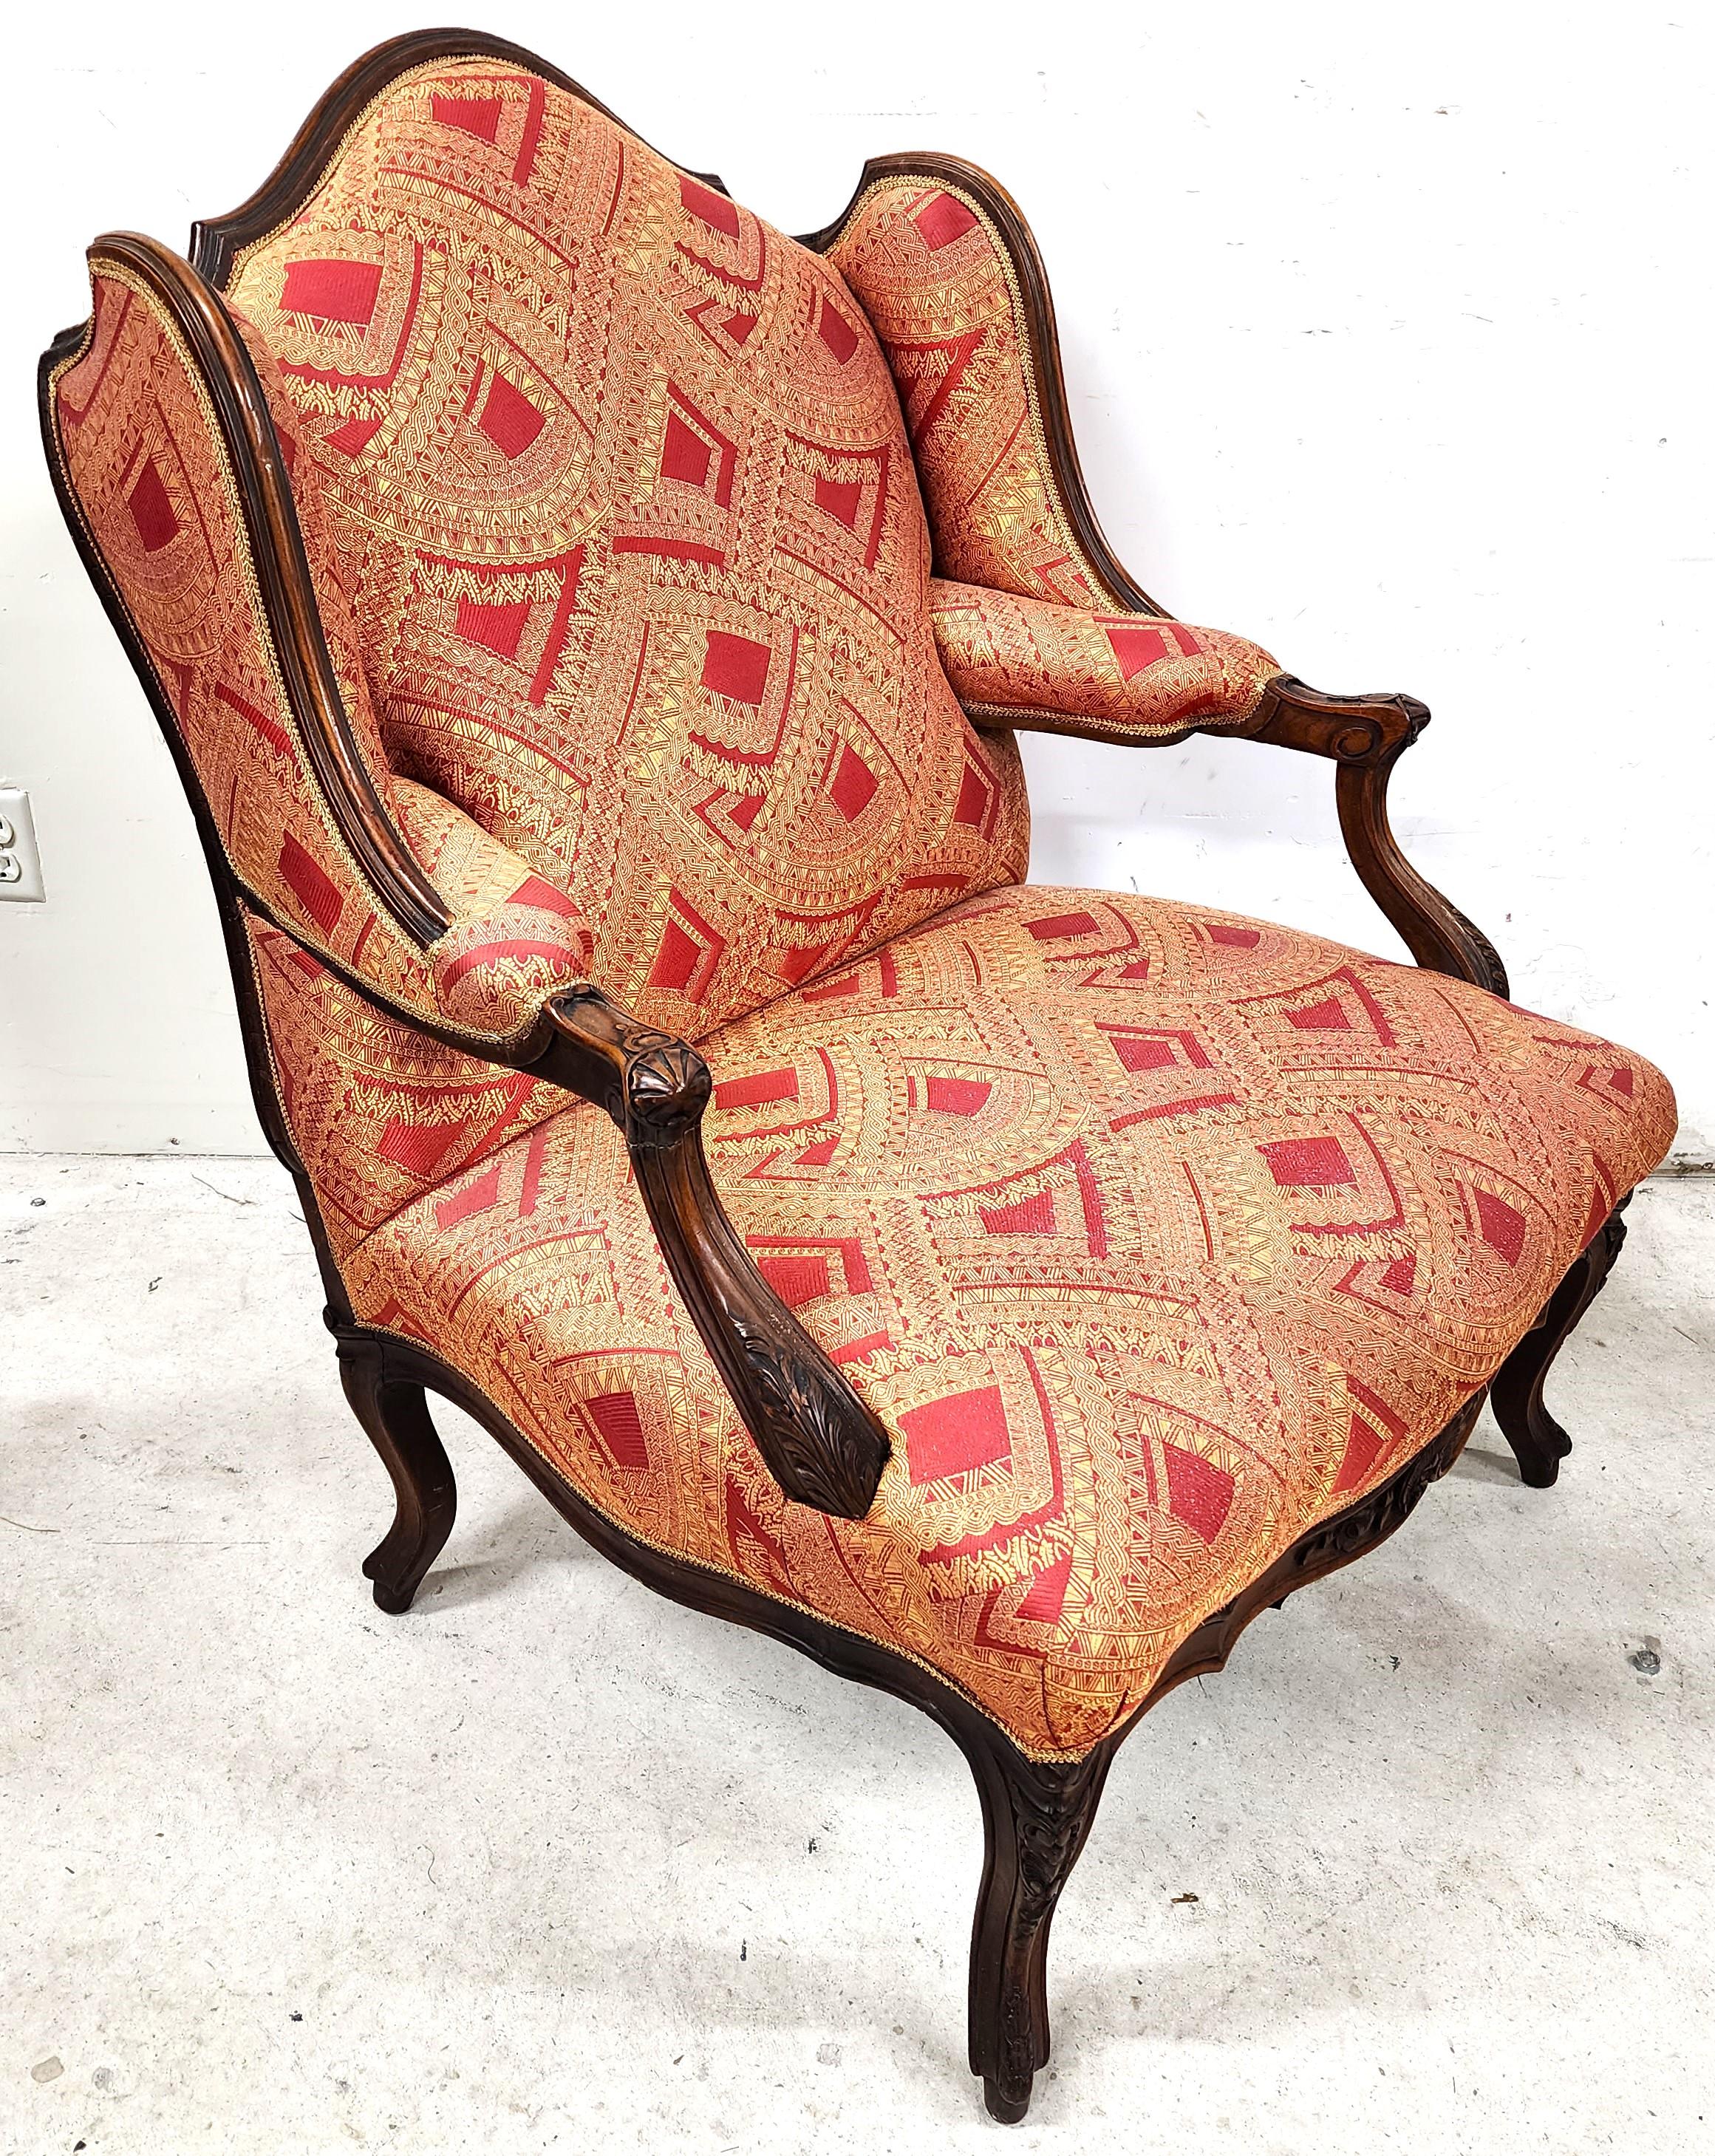 For FULL item description click on CONTINUE READING at the bottom of this page.

Offering One Of Our Recent Palm Beach Estate fine Furniture Acquisitions Of An
Antique French Provincial Carved Walnut Frame Wingback Armchair

Approximate